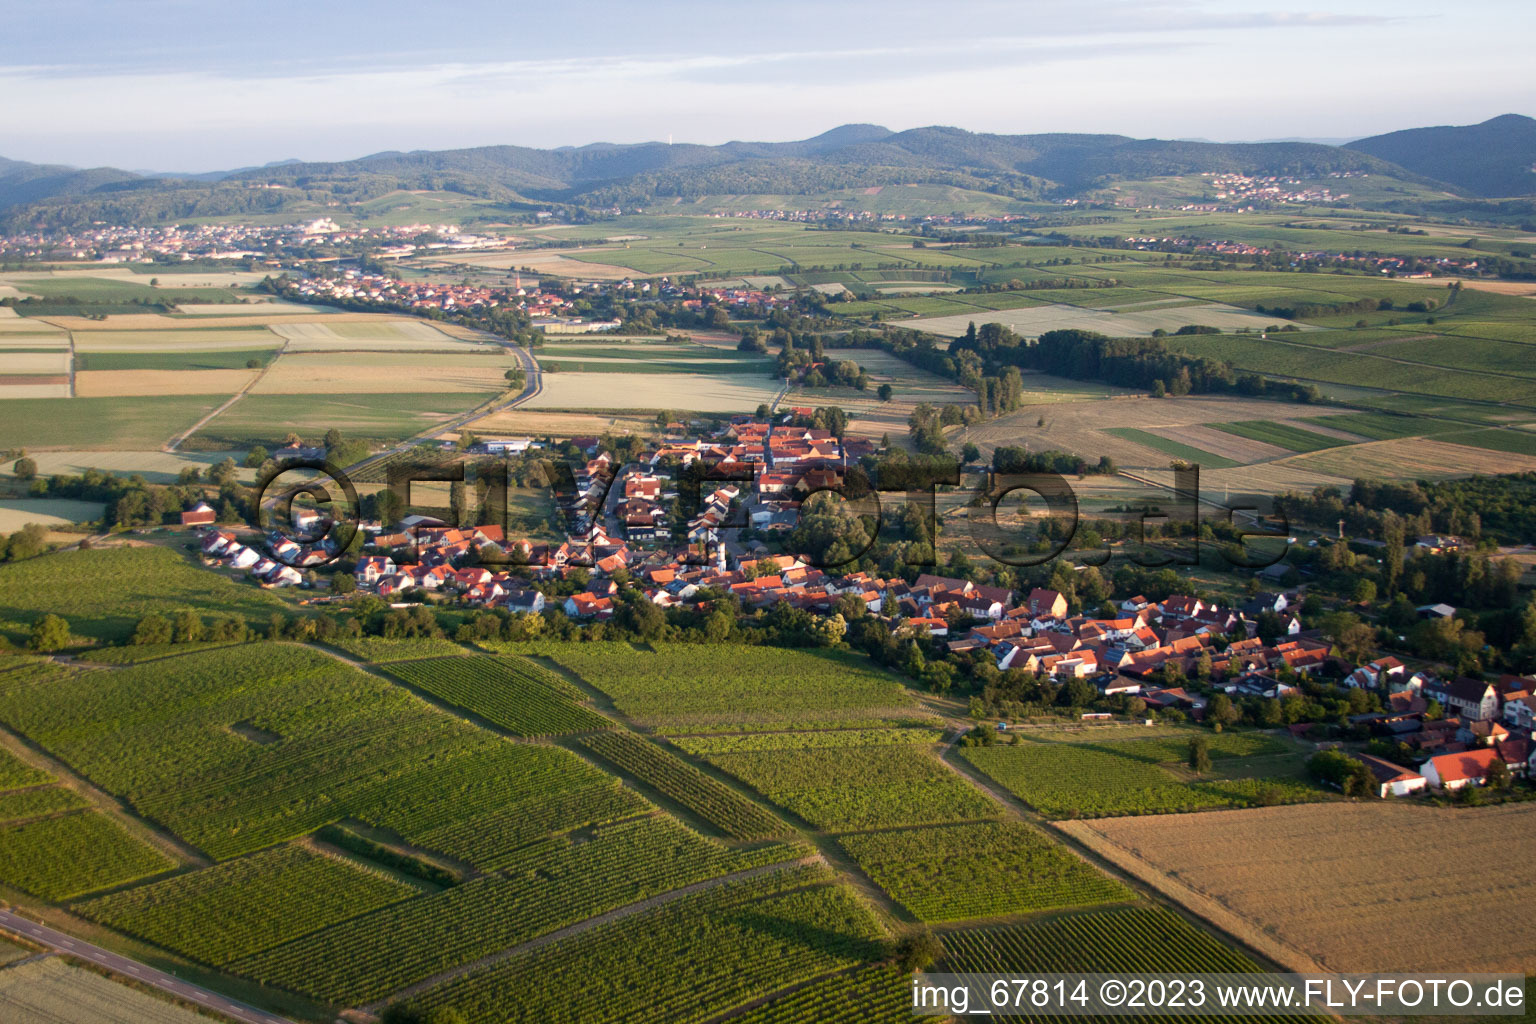 Oberhausen in the state Rhineland-Palatinate, Germany from above